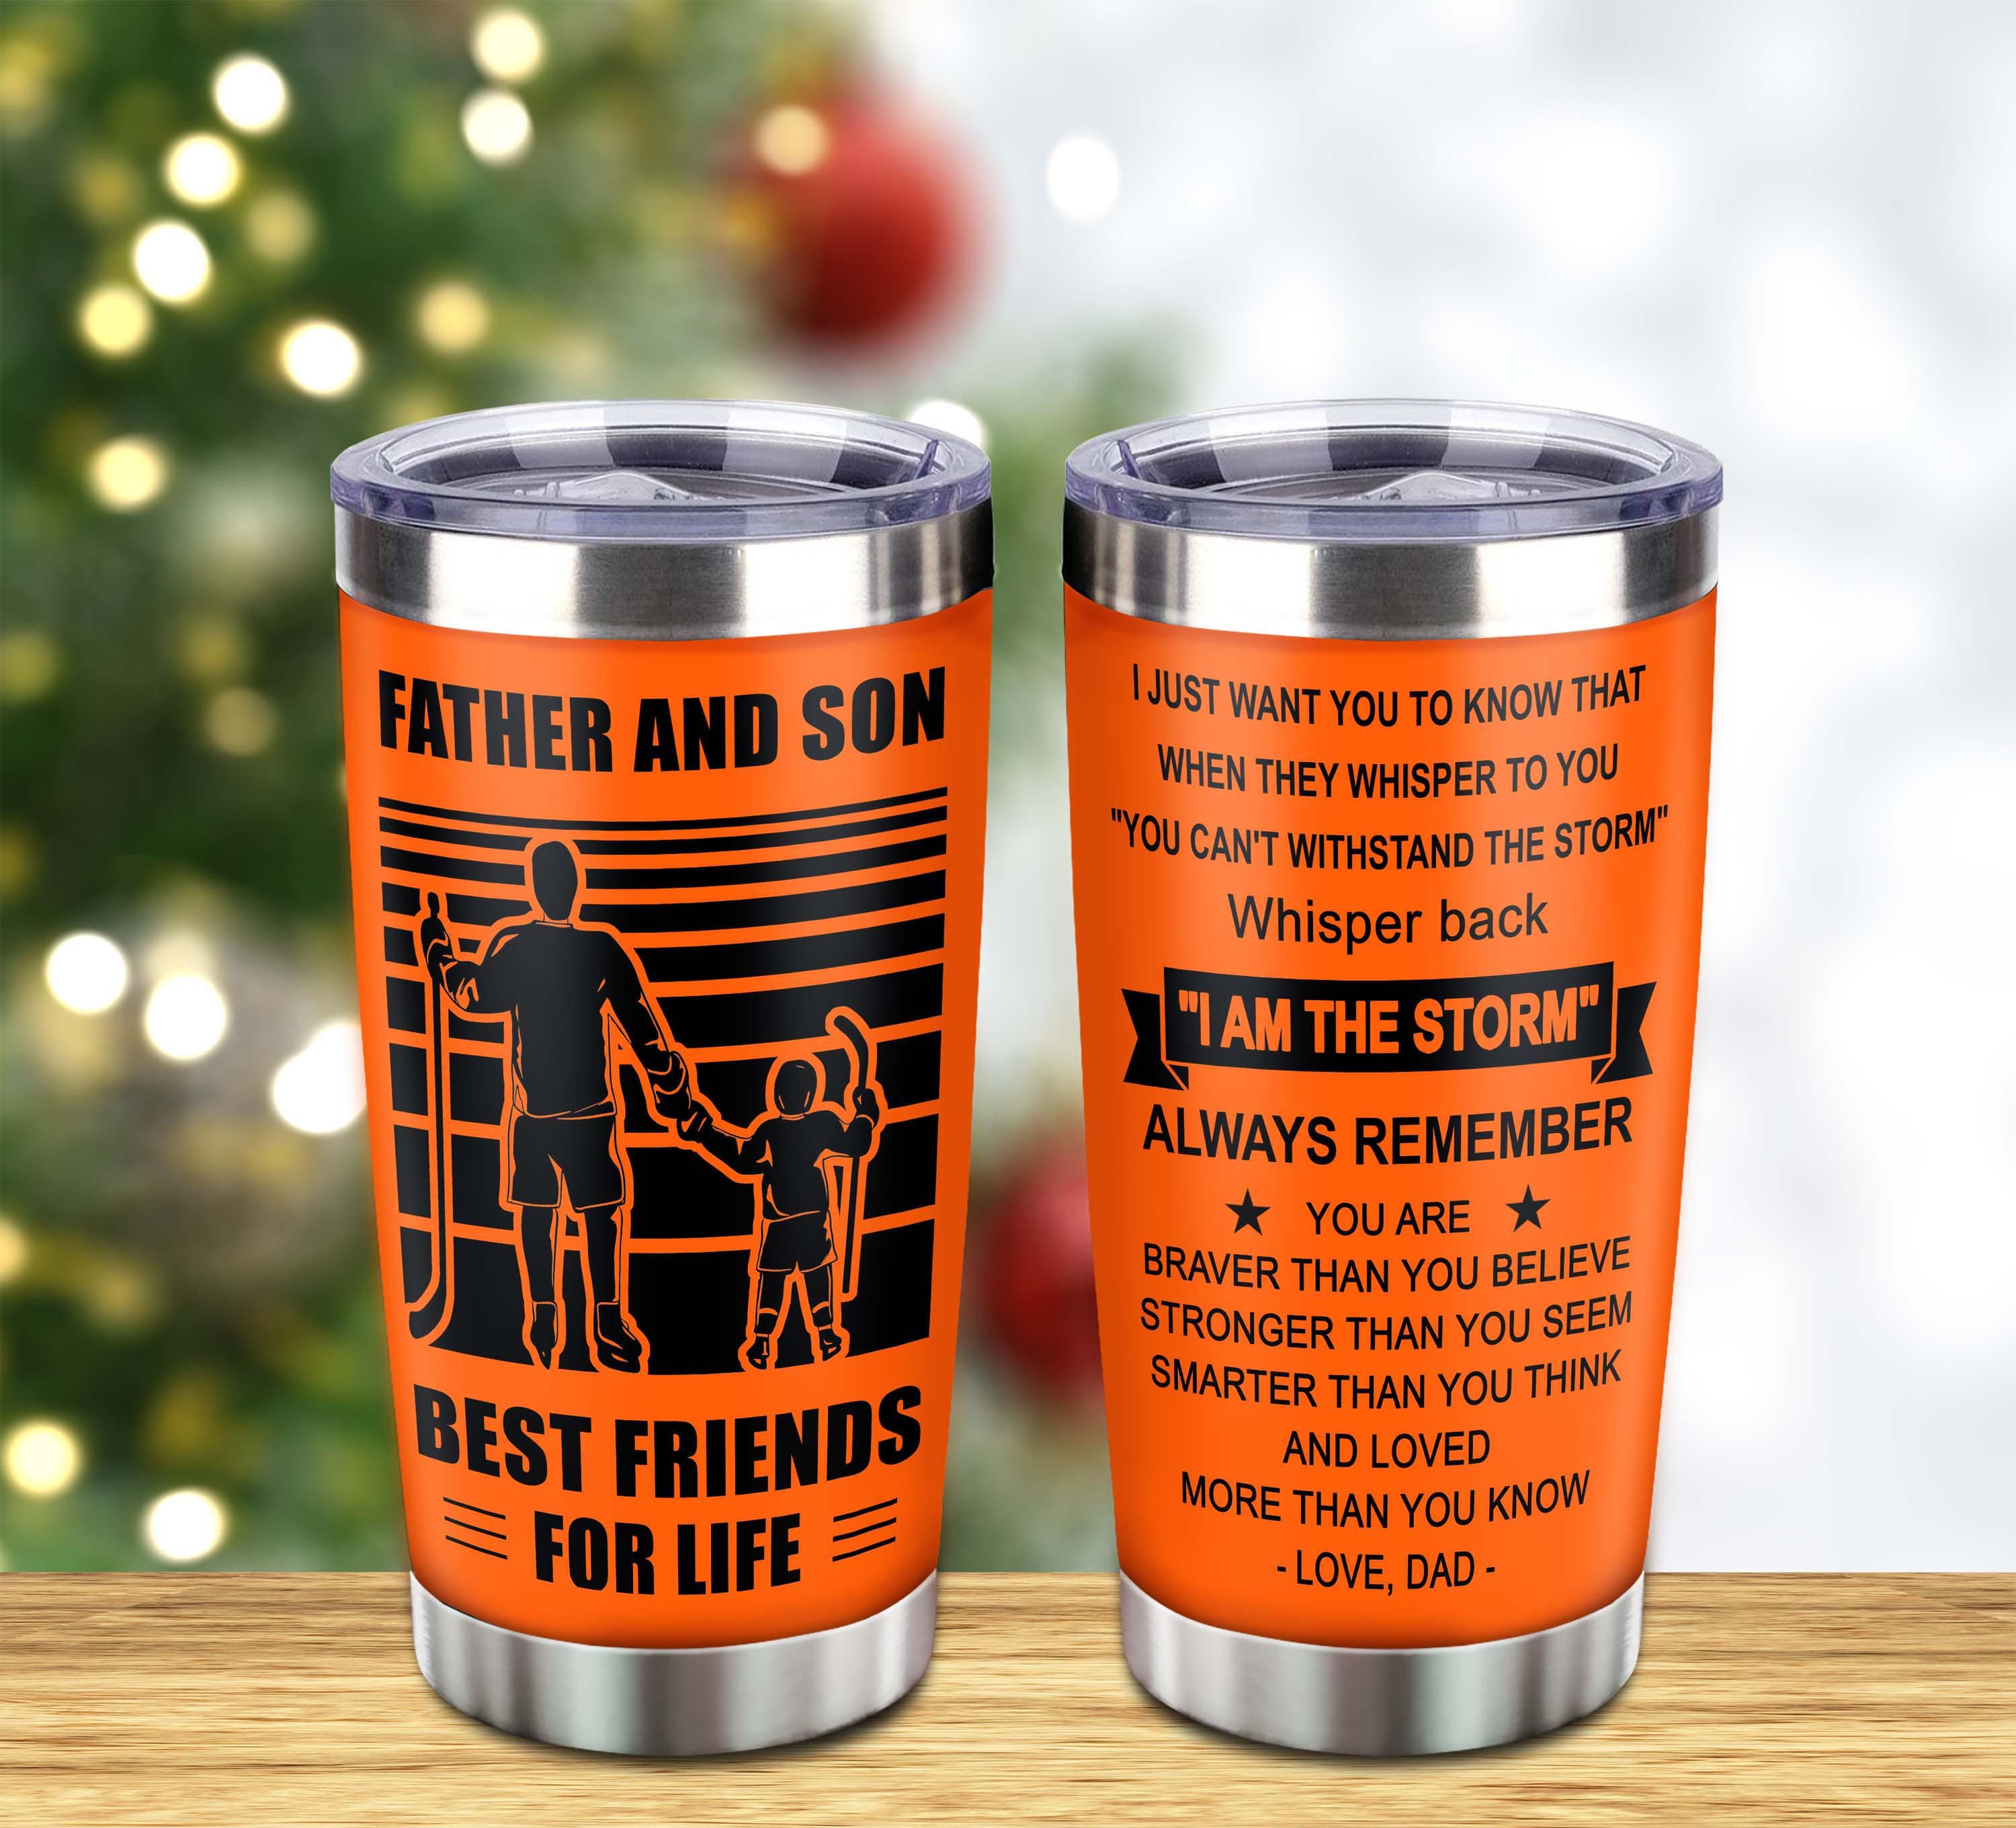 Customizable Soccer Tumbler, Gifts From Dad To Son Father And Son Best Friend For Life With Inspriration Message